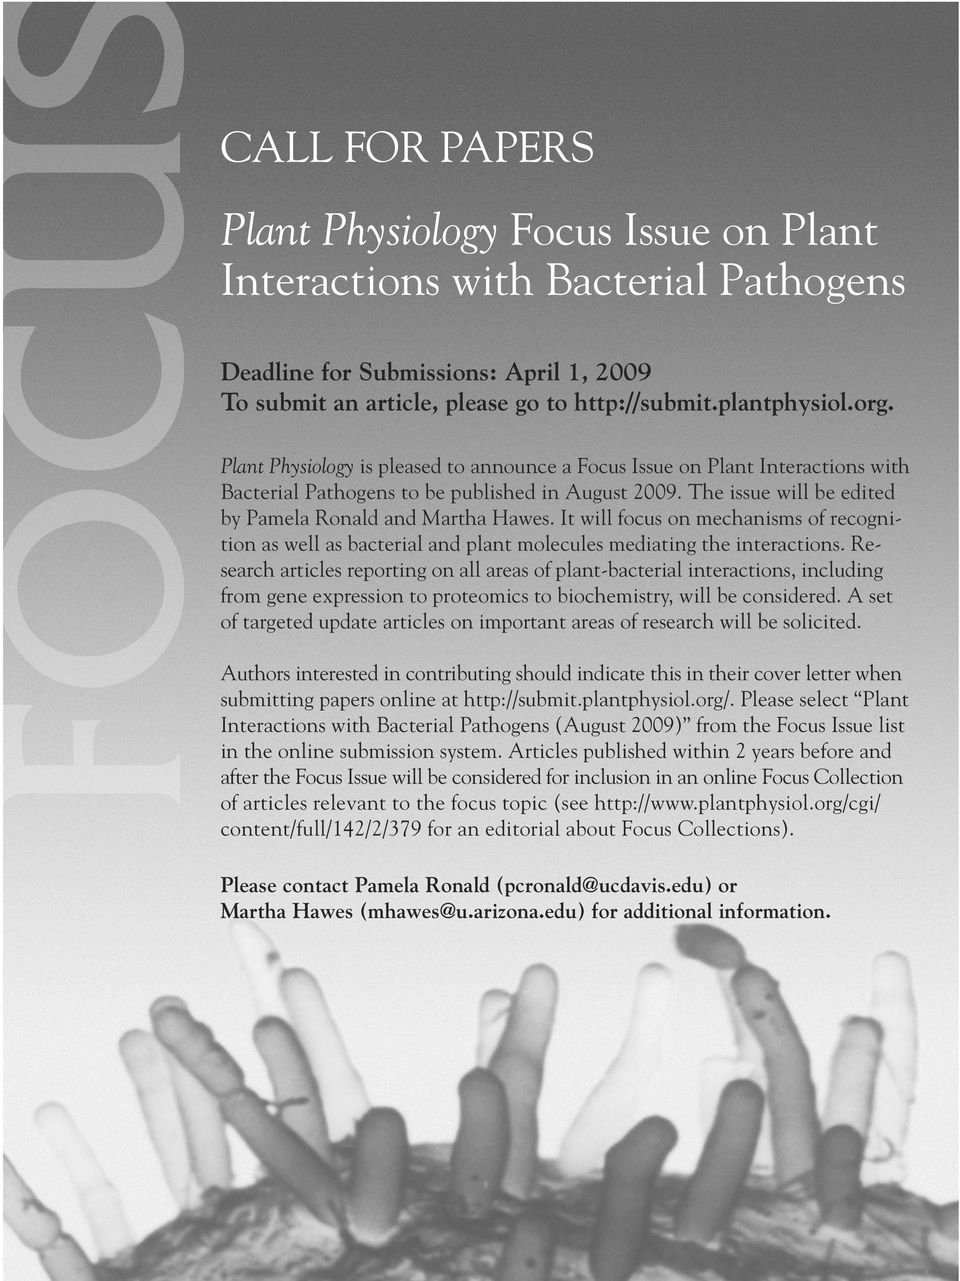 Plant Physiology is pleased to announce a Focus Issue on Plant Interactions with Bacterial Pathogens to be published in August 2009. The issue will be edited by Pamela Ronald and Martha Hawes.